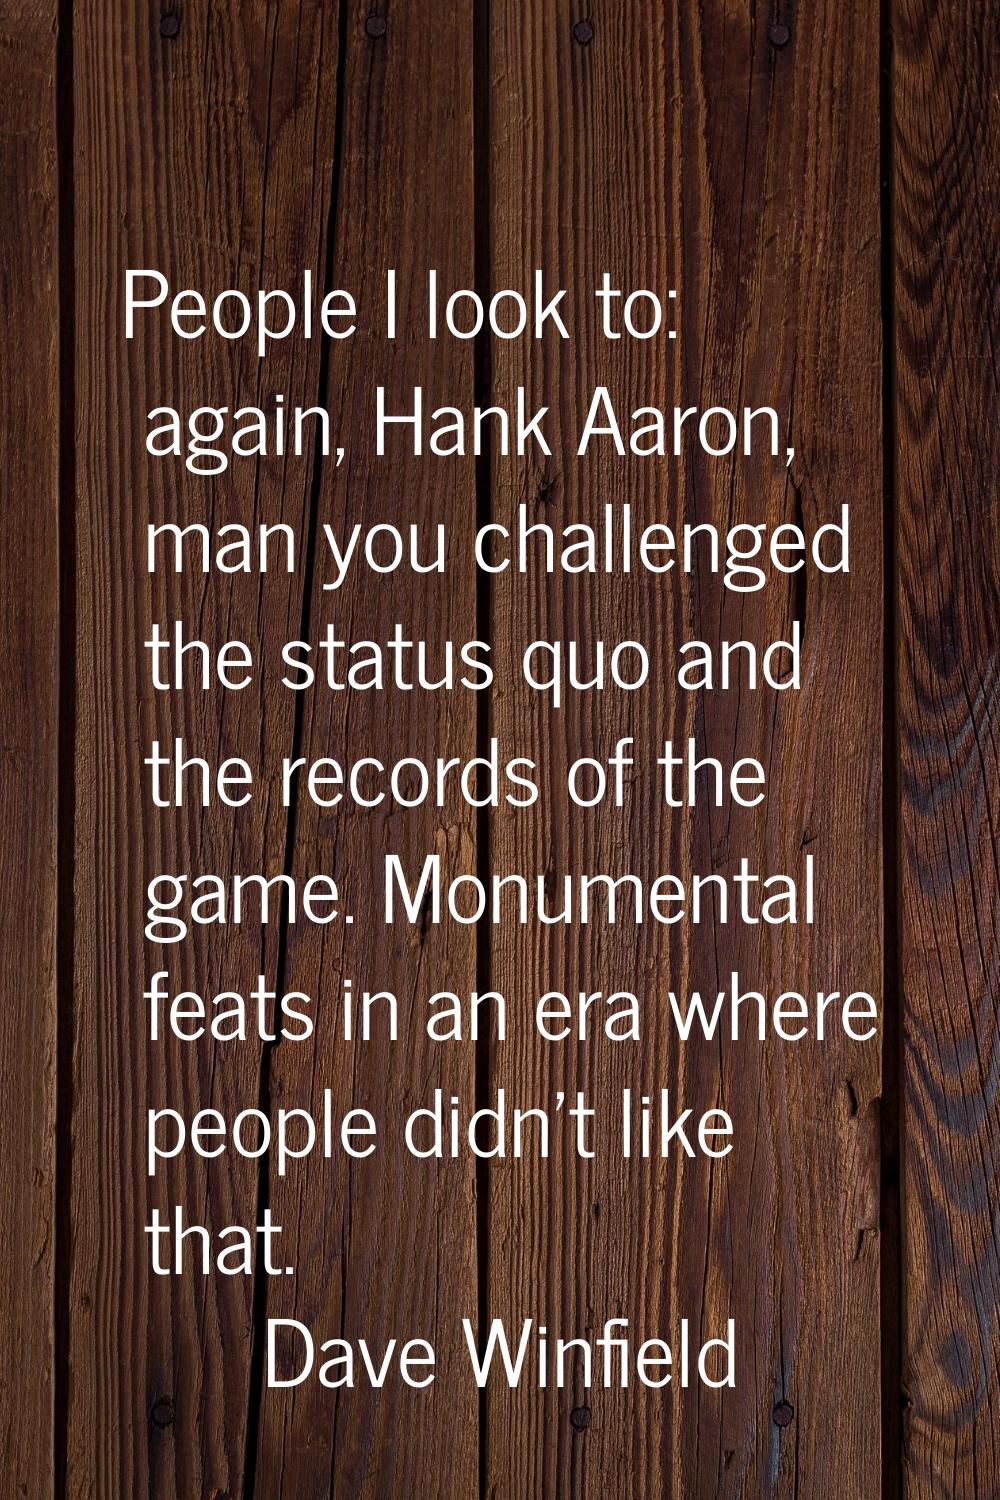 People I look to: again, Hank Aaron, man you challenged the status quo and the records of the game.